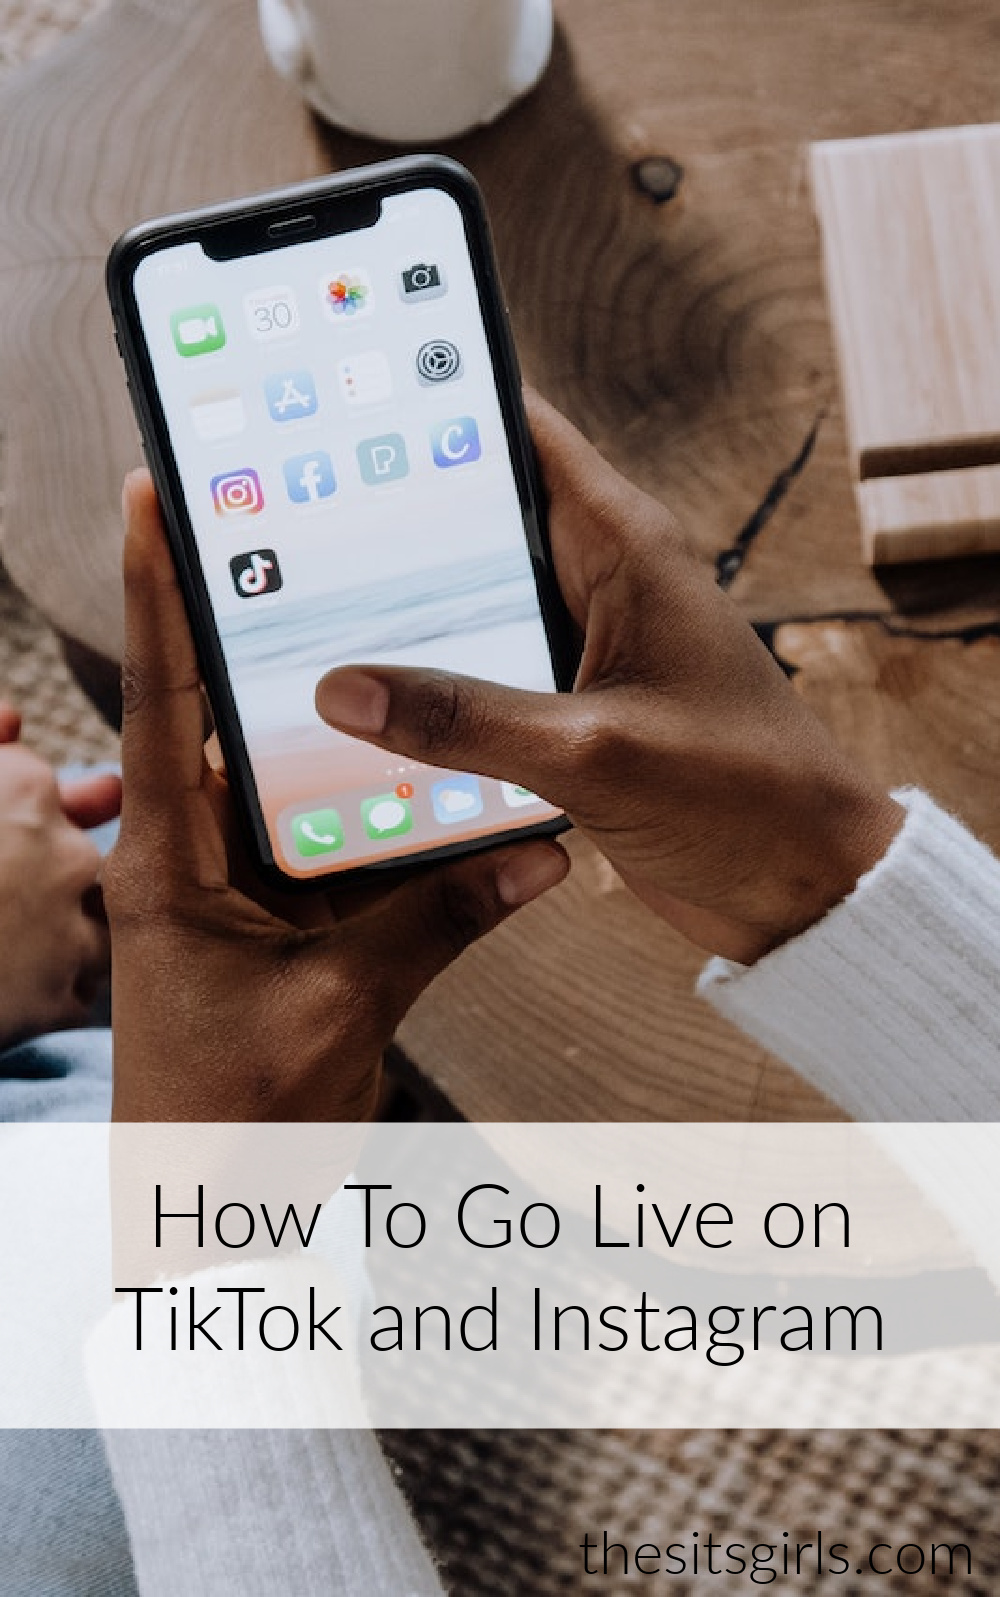 Hands holding a phone with social media app icons showing and the text how to go live on TikTok and Instagram.